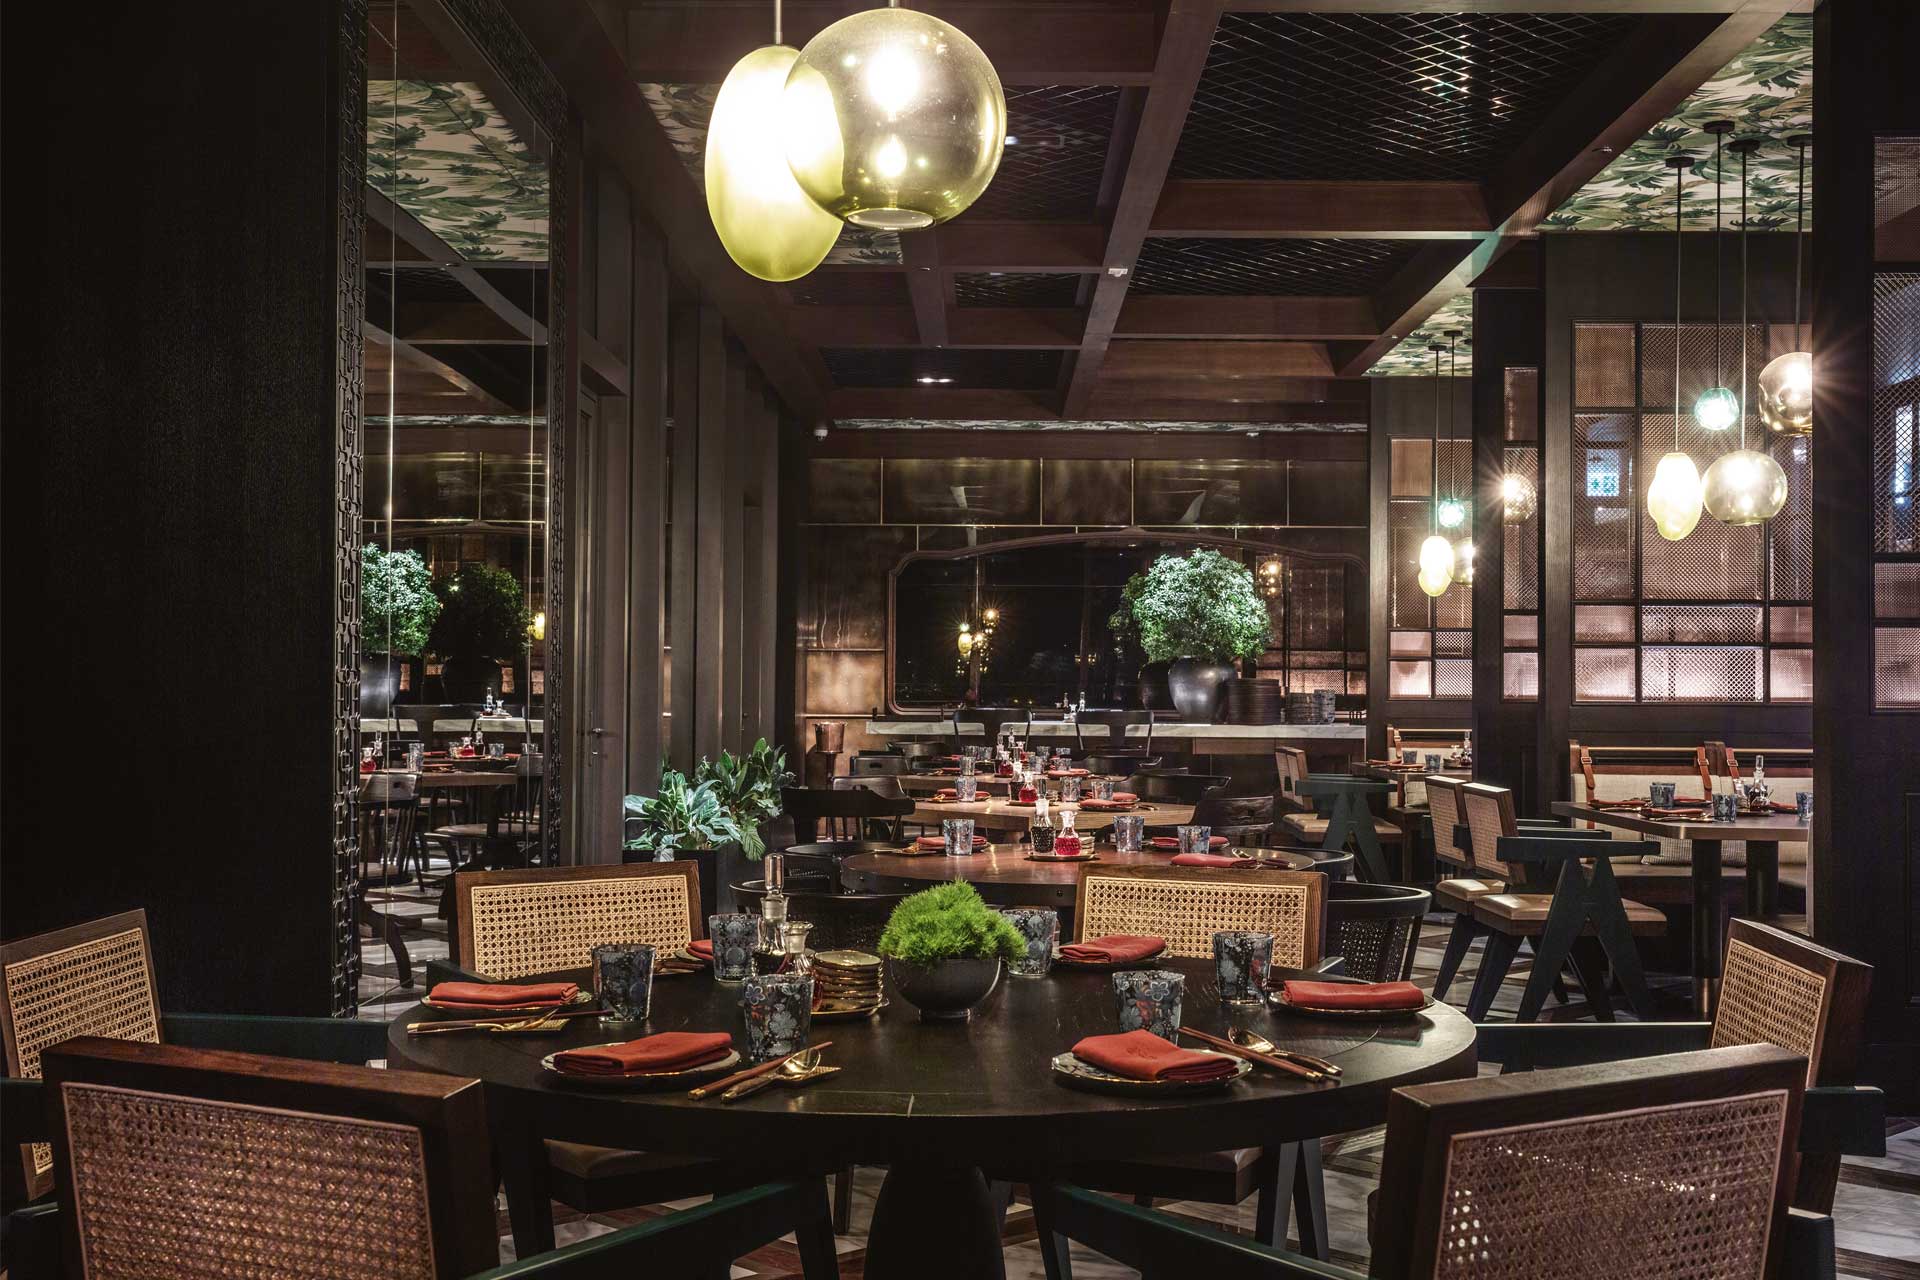 A restaurant at Rosewood's luxury hotel in Hong Kong 